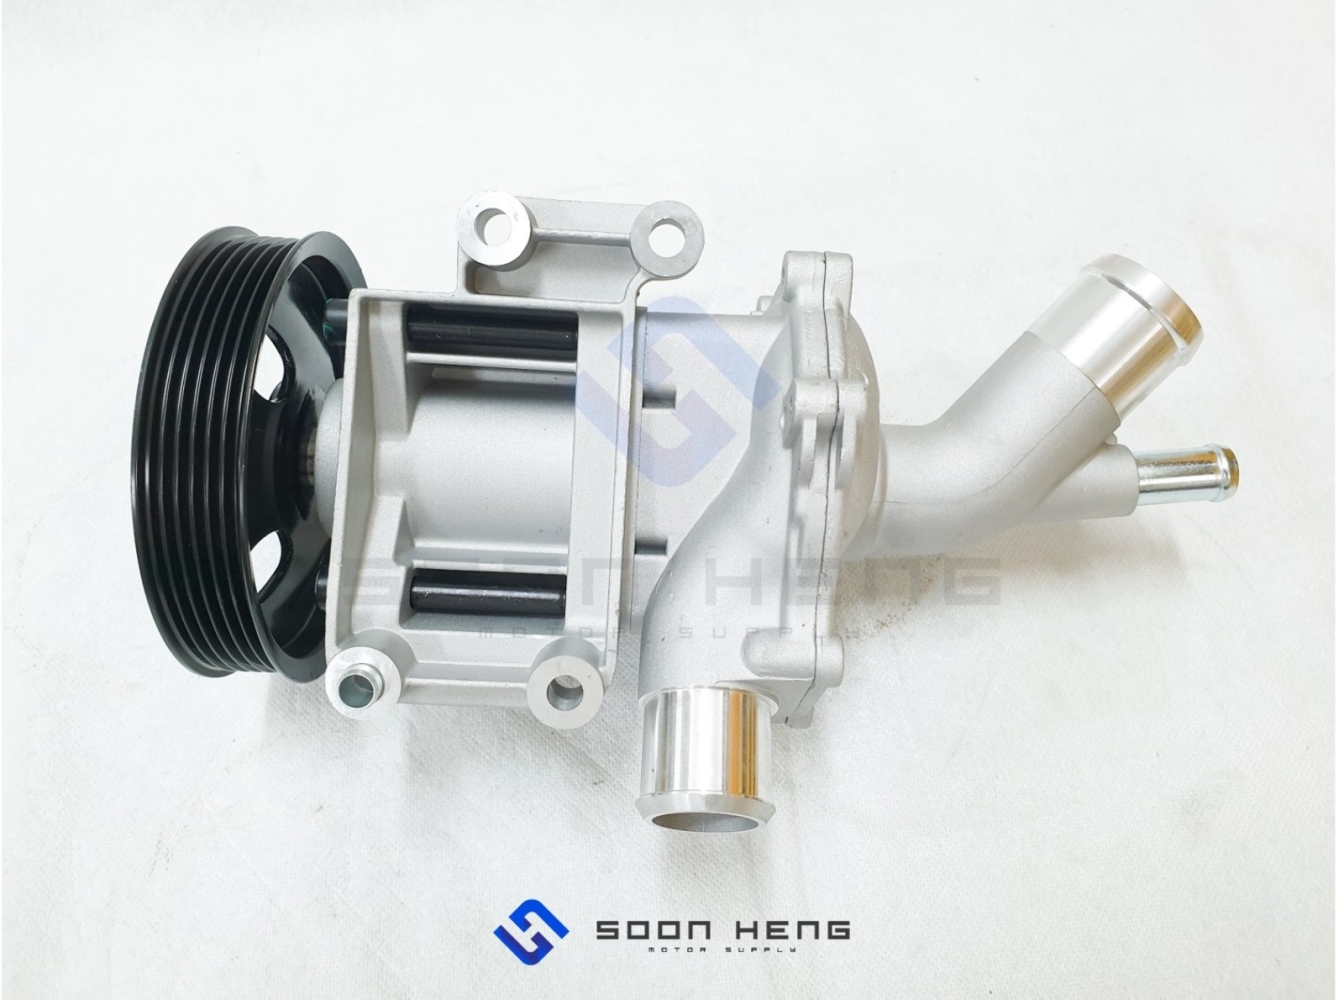 MINI R50, R52 and R53 with Engine W10 (1.6 displacement) - Water Pump (MEYLE)